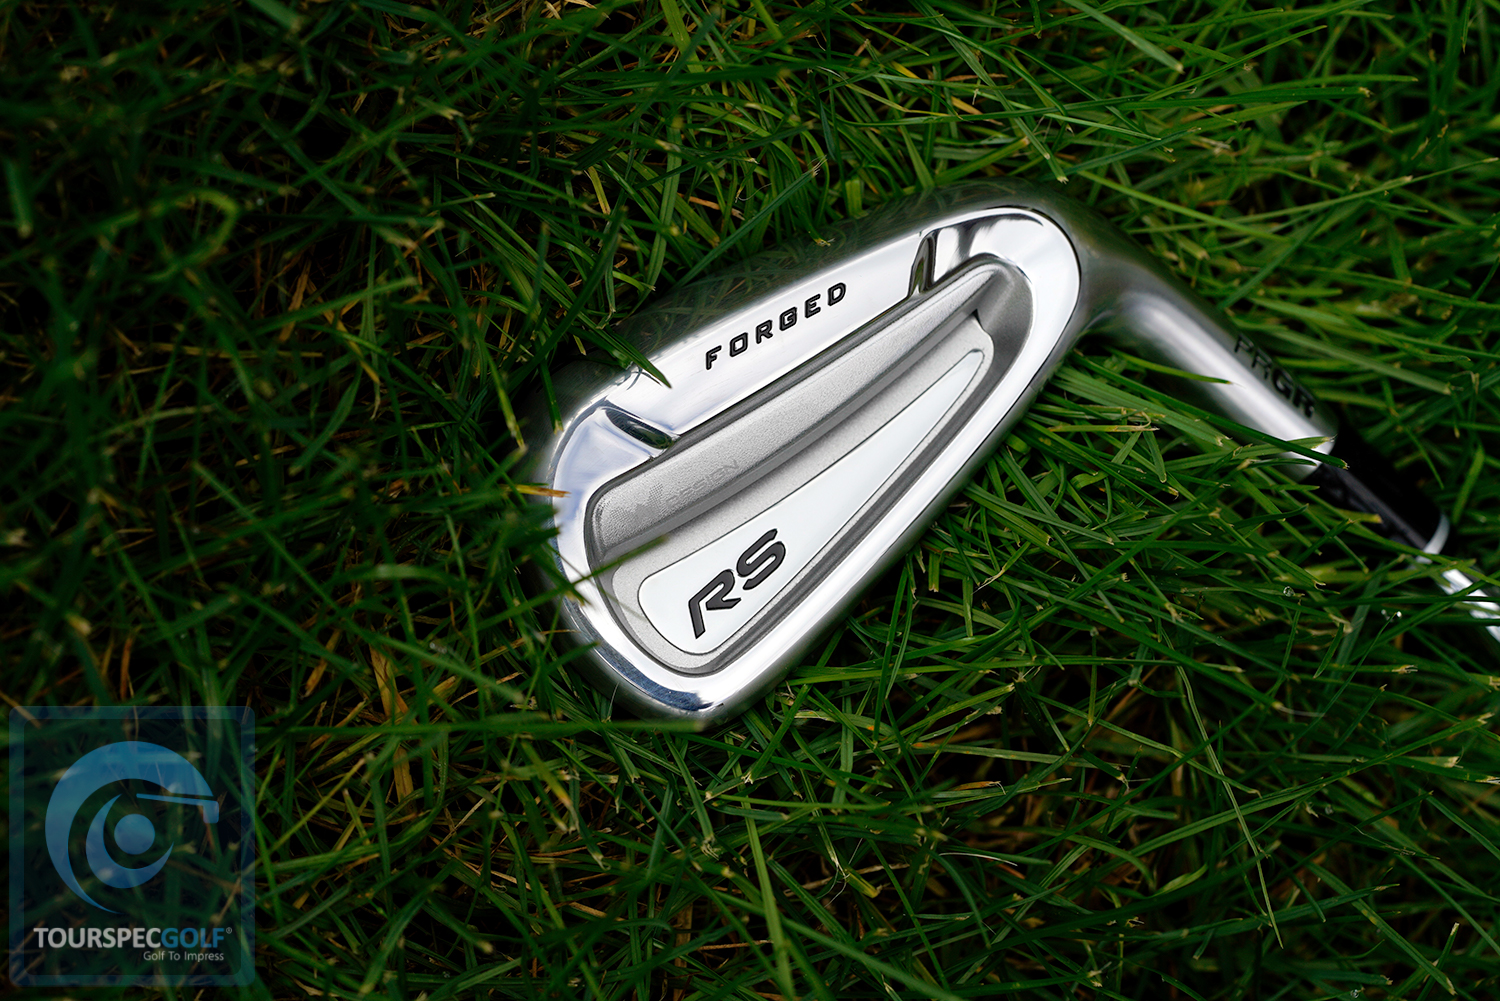 The New PRGR RS Forged Irons - TourSpecGolf Golf Blog